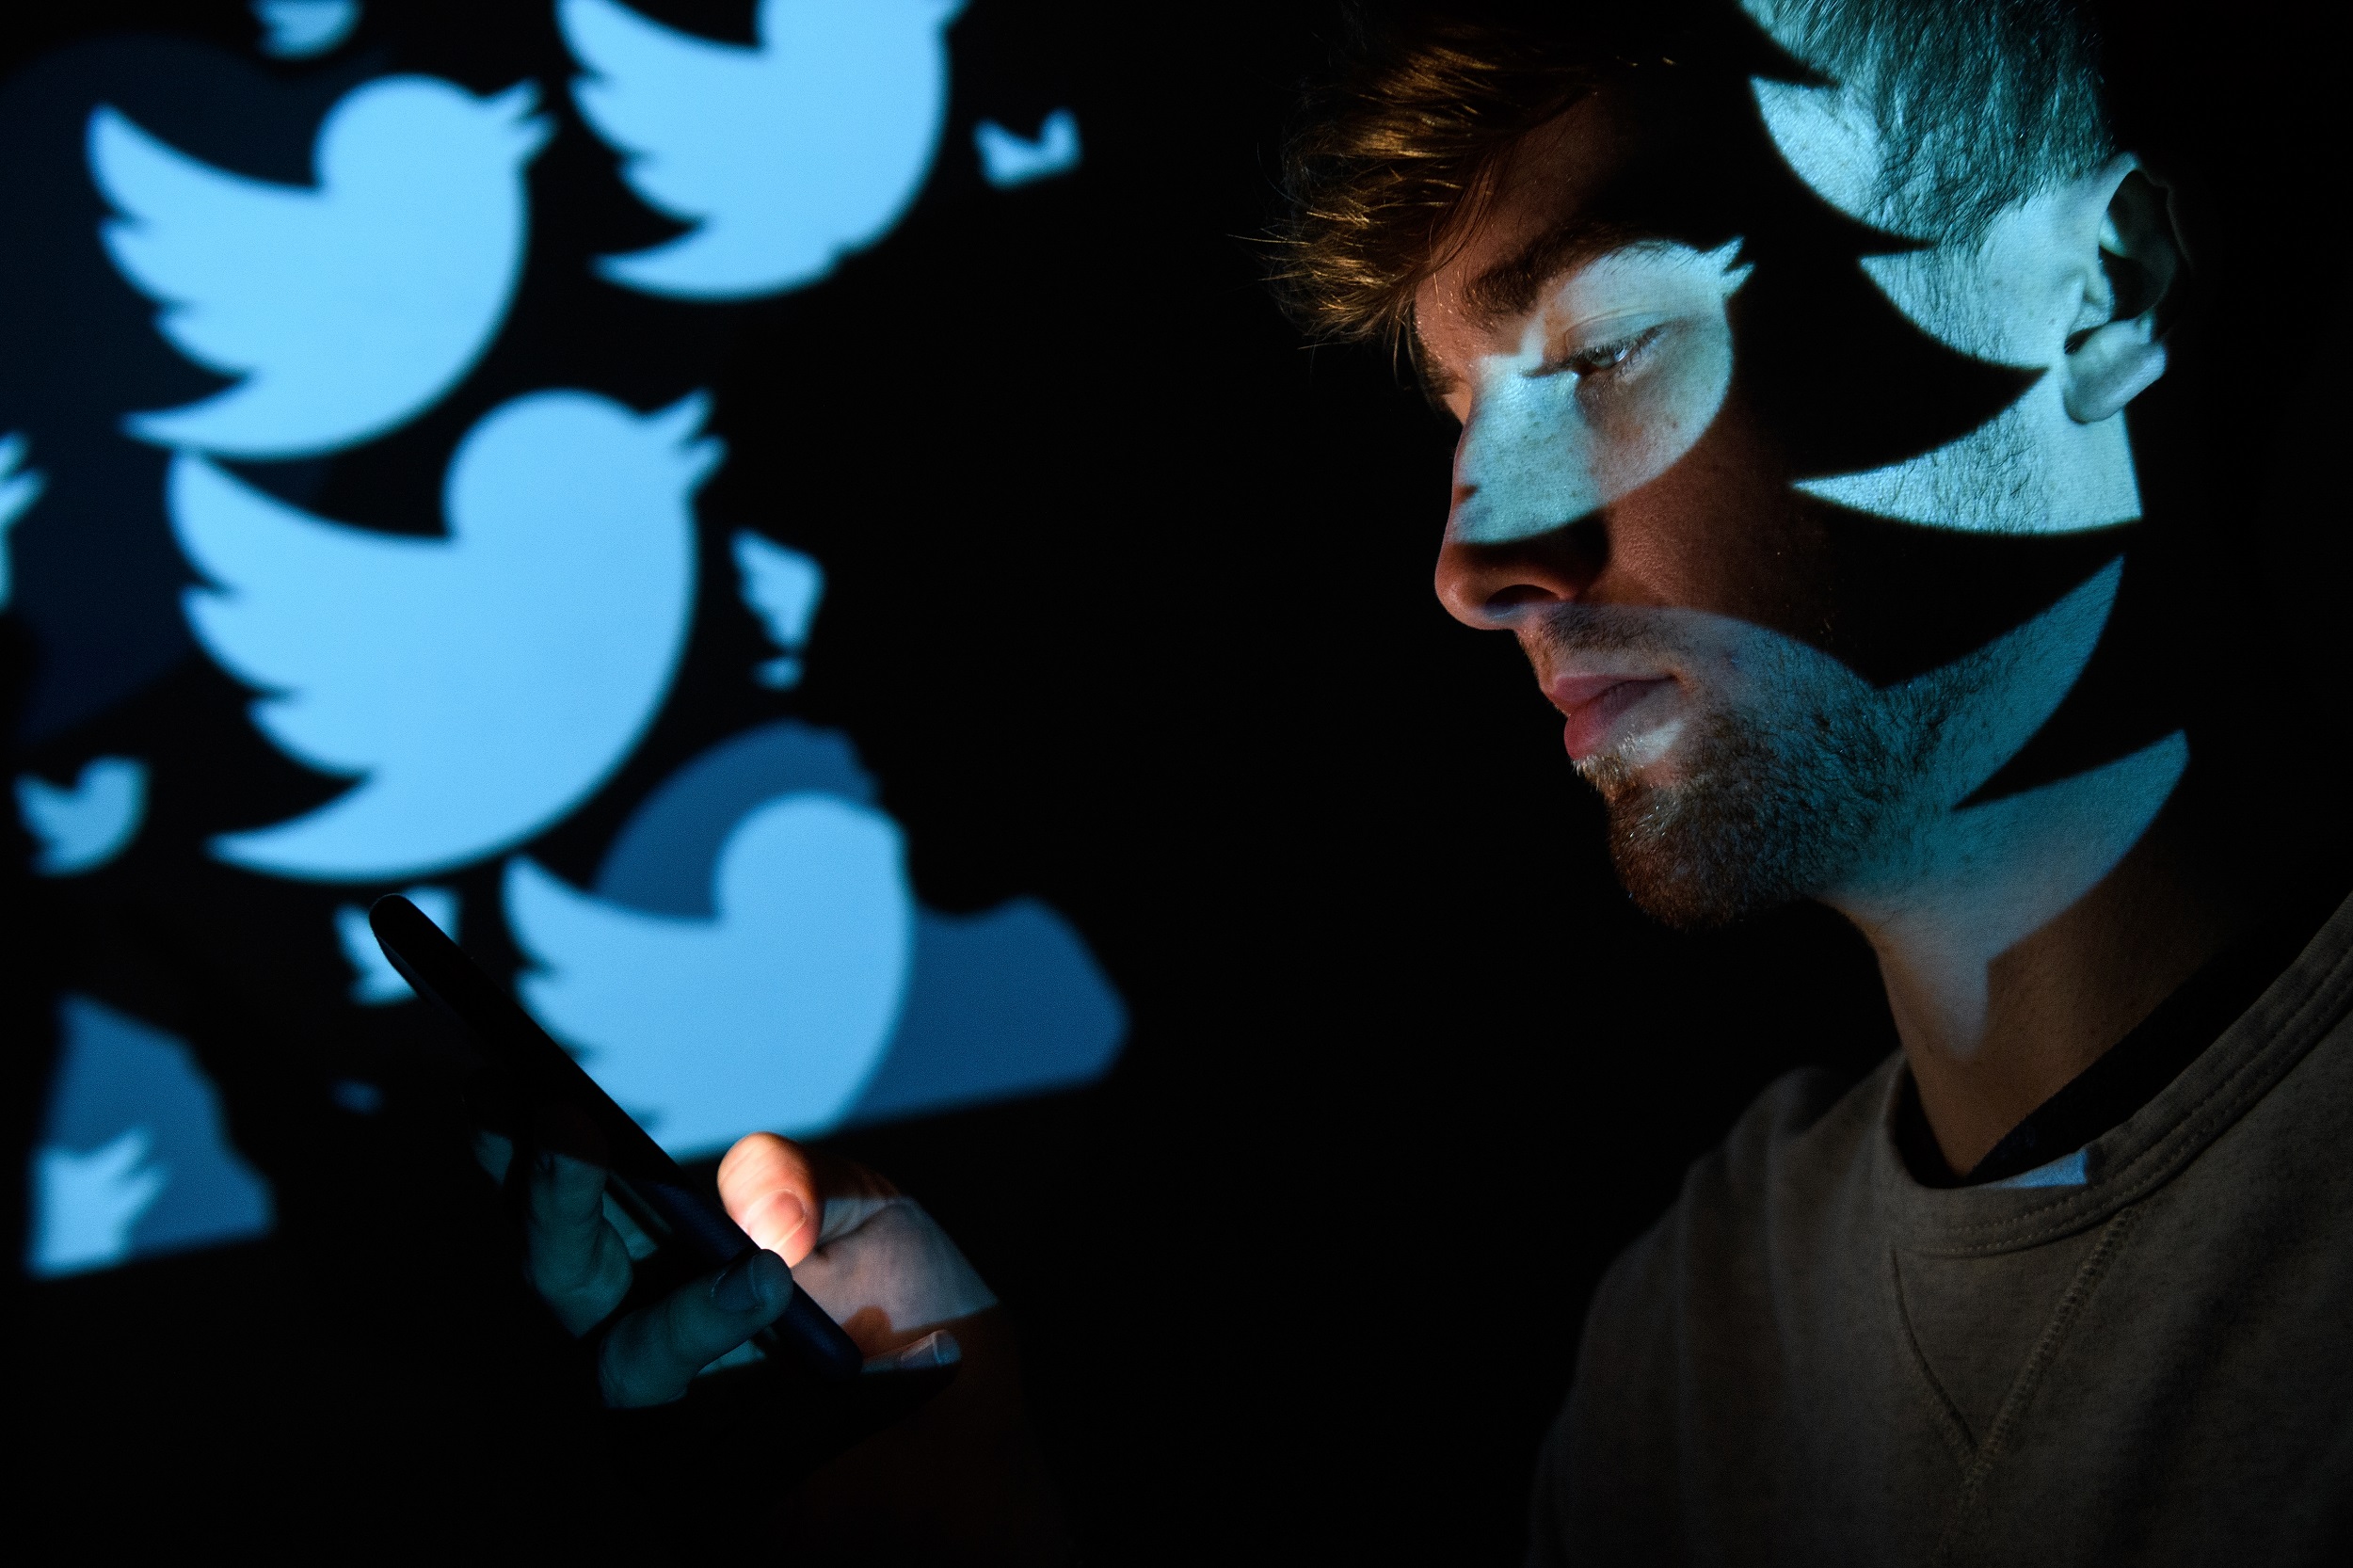 A picture of a man scrolling on his phone in a dark room while the Blue Twitter logo is projected on the wall behind him.